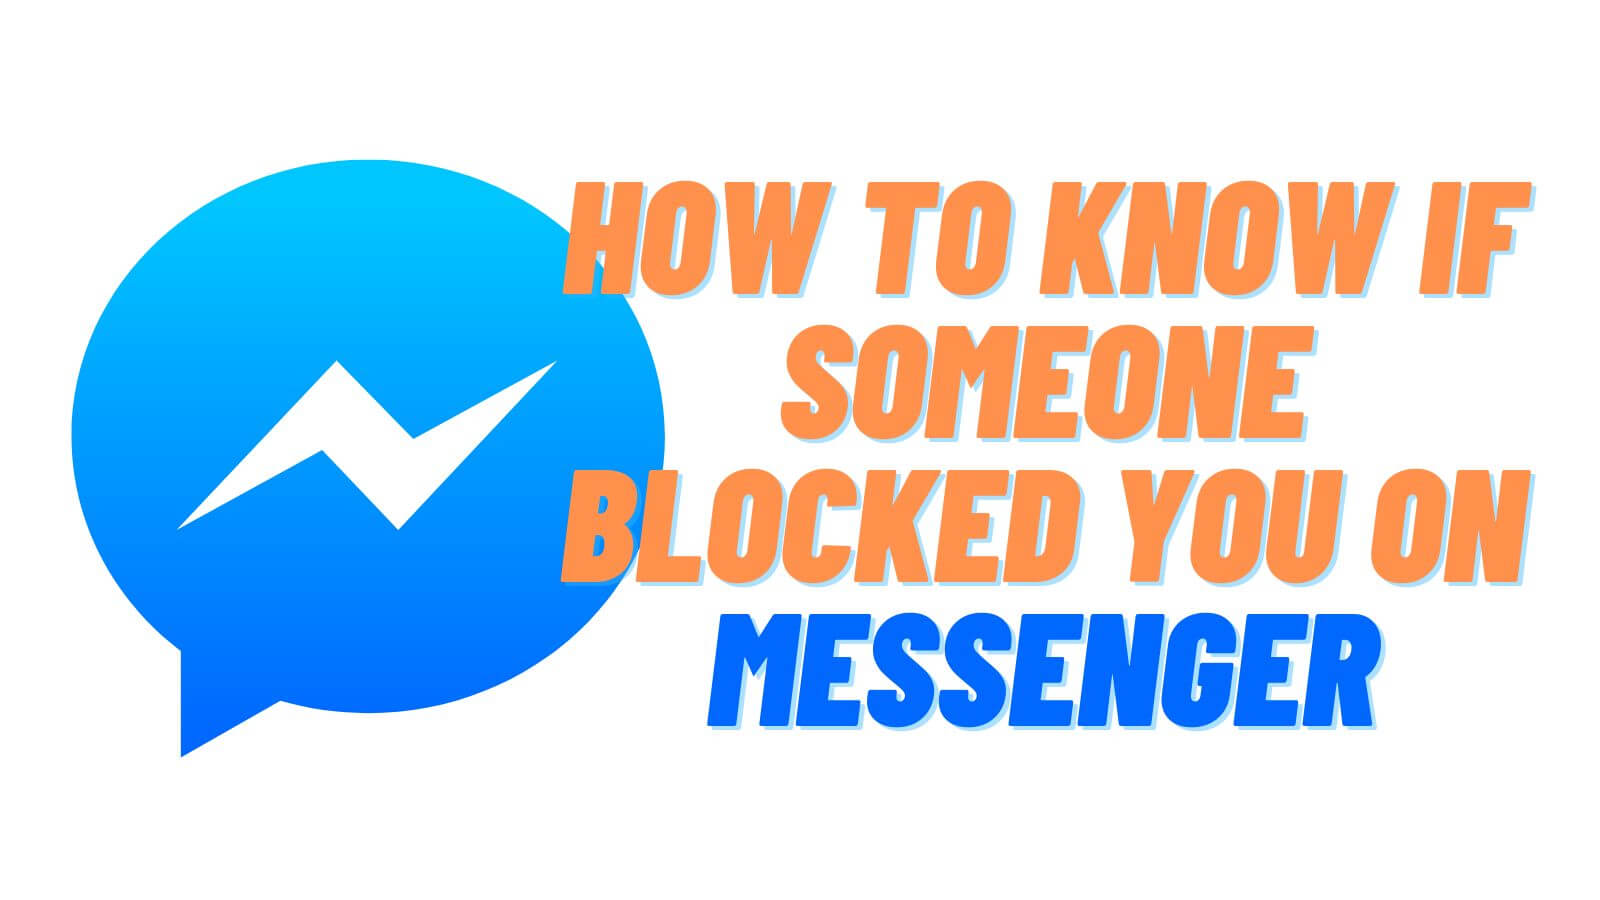 How to Know If Someone Blocked You on Messenger